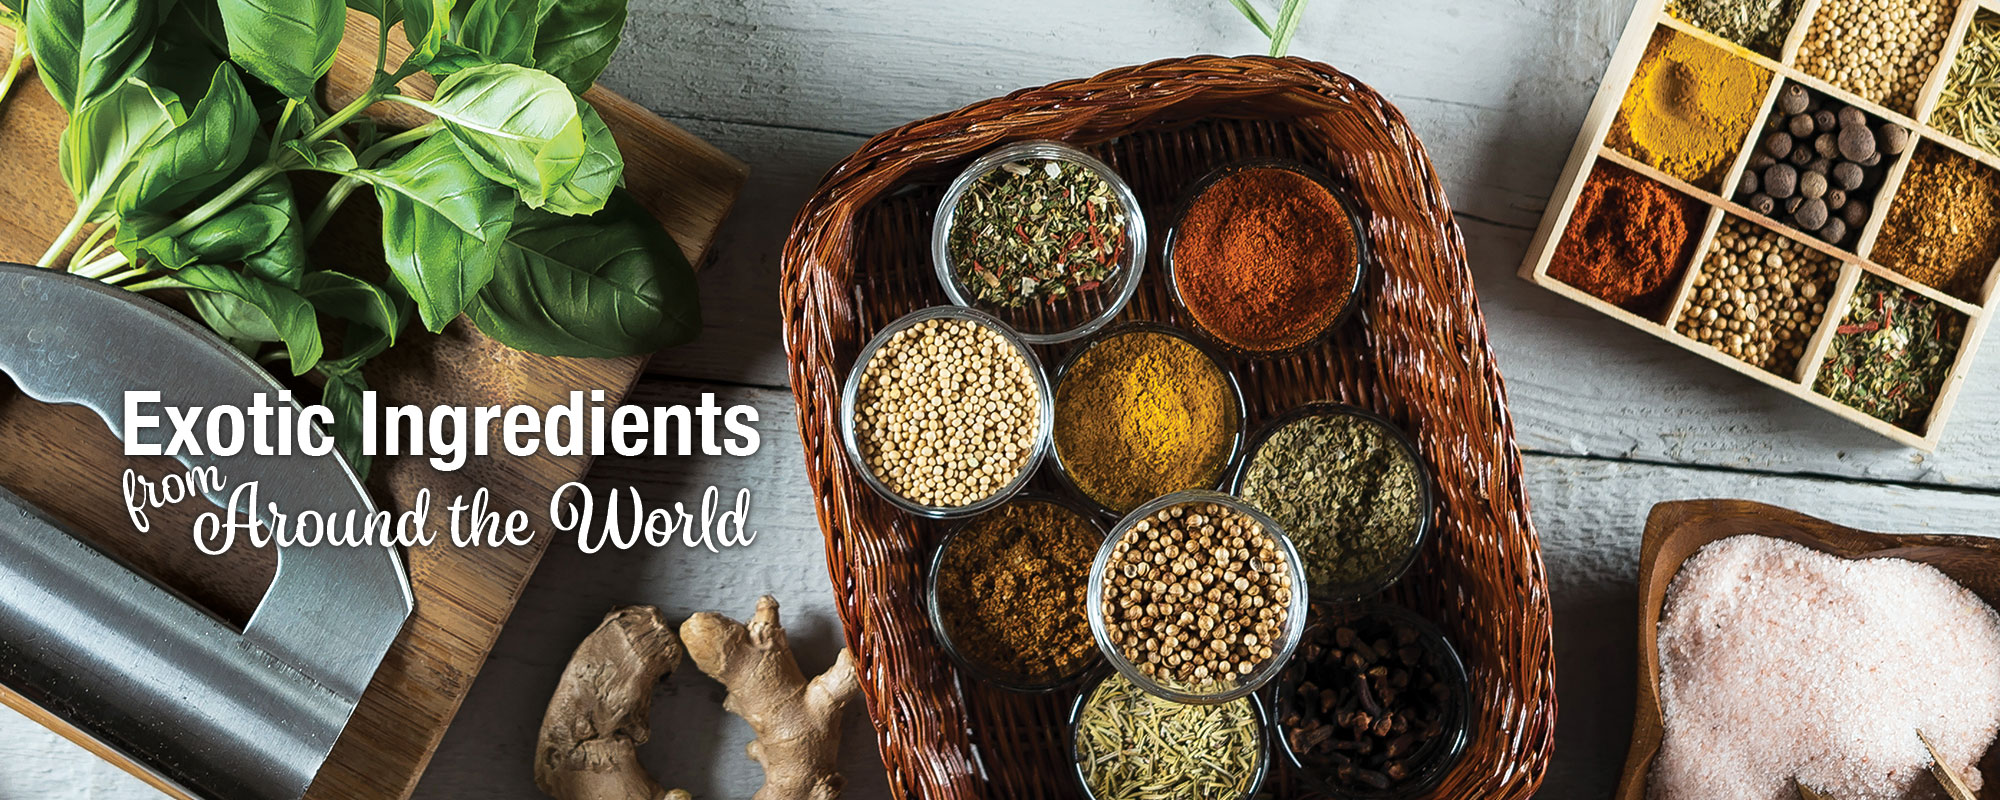 Exotic Ingredients From Around the World